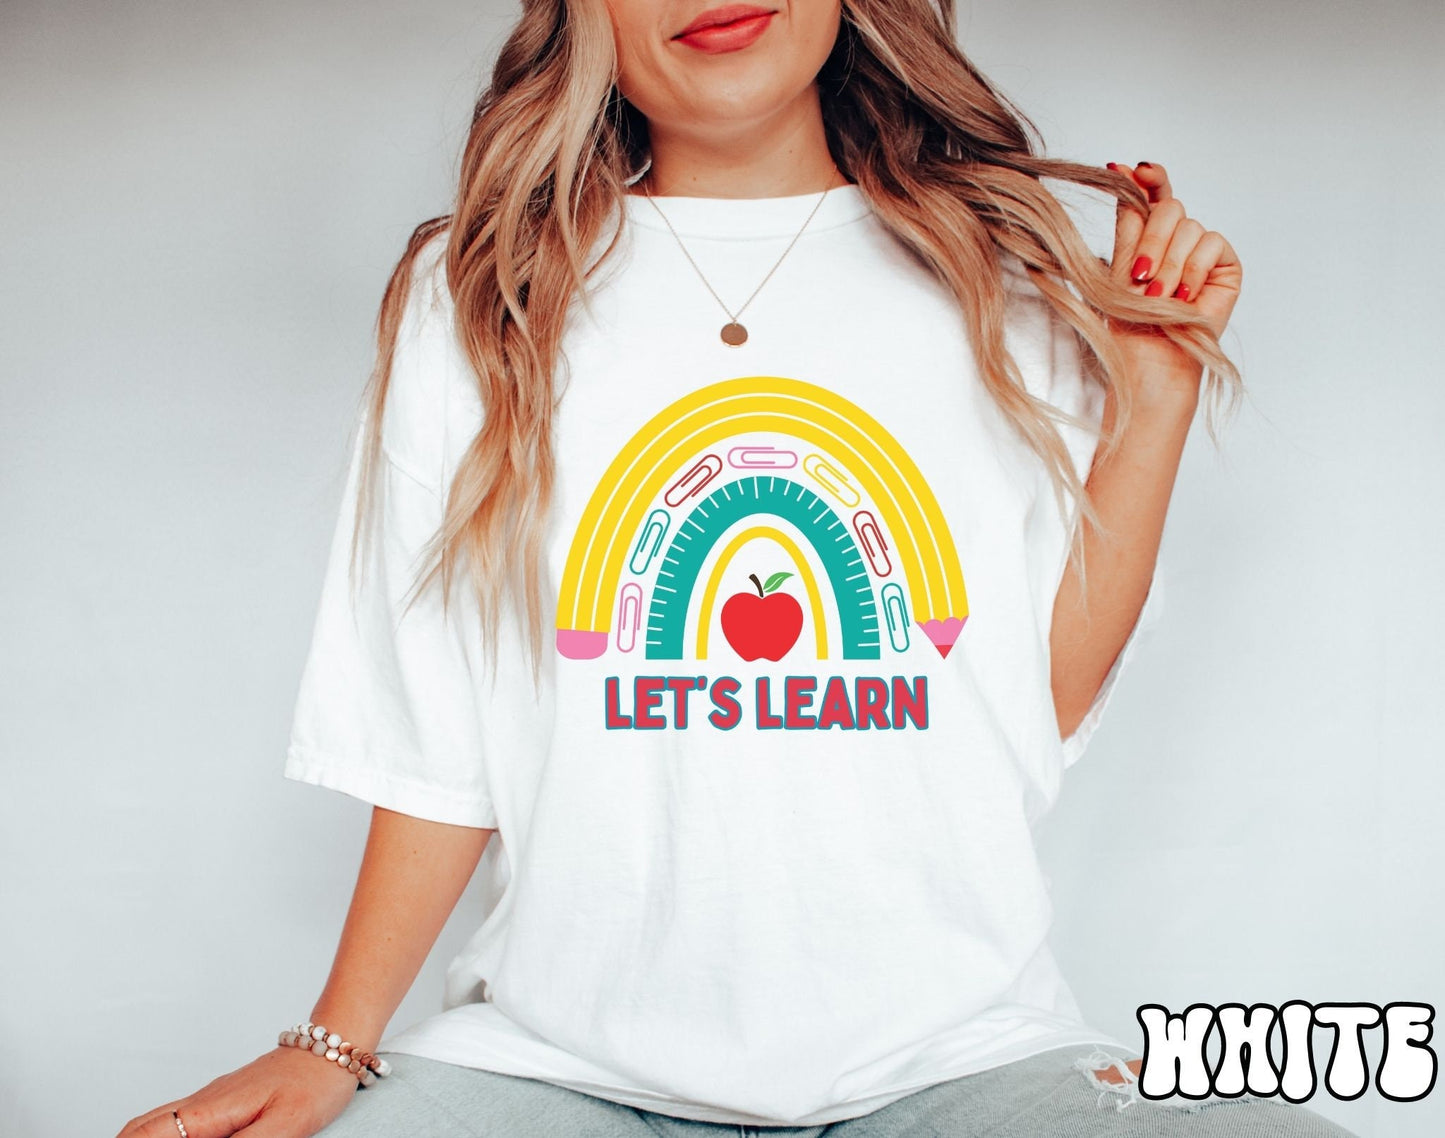 The Let's Learn Teacher Shirt, Gift This to Your Favorite Difference Maker!